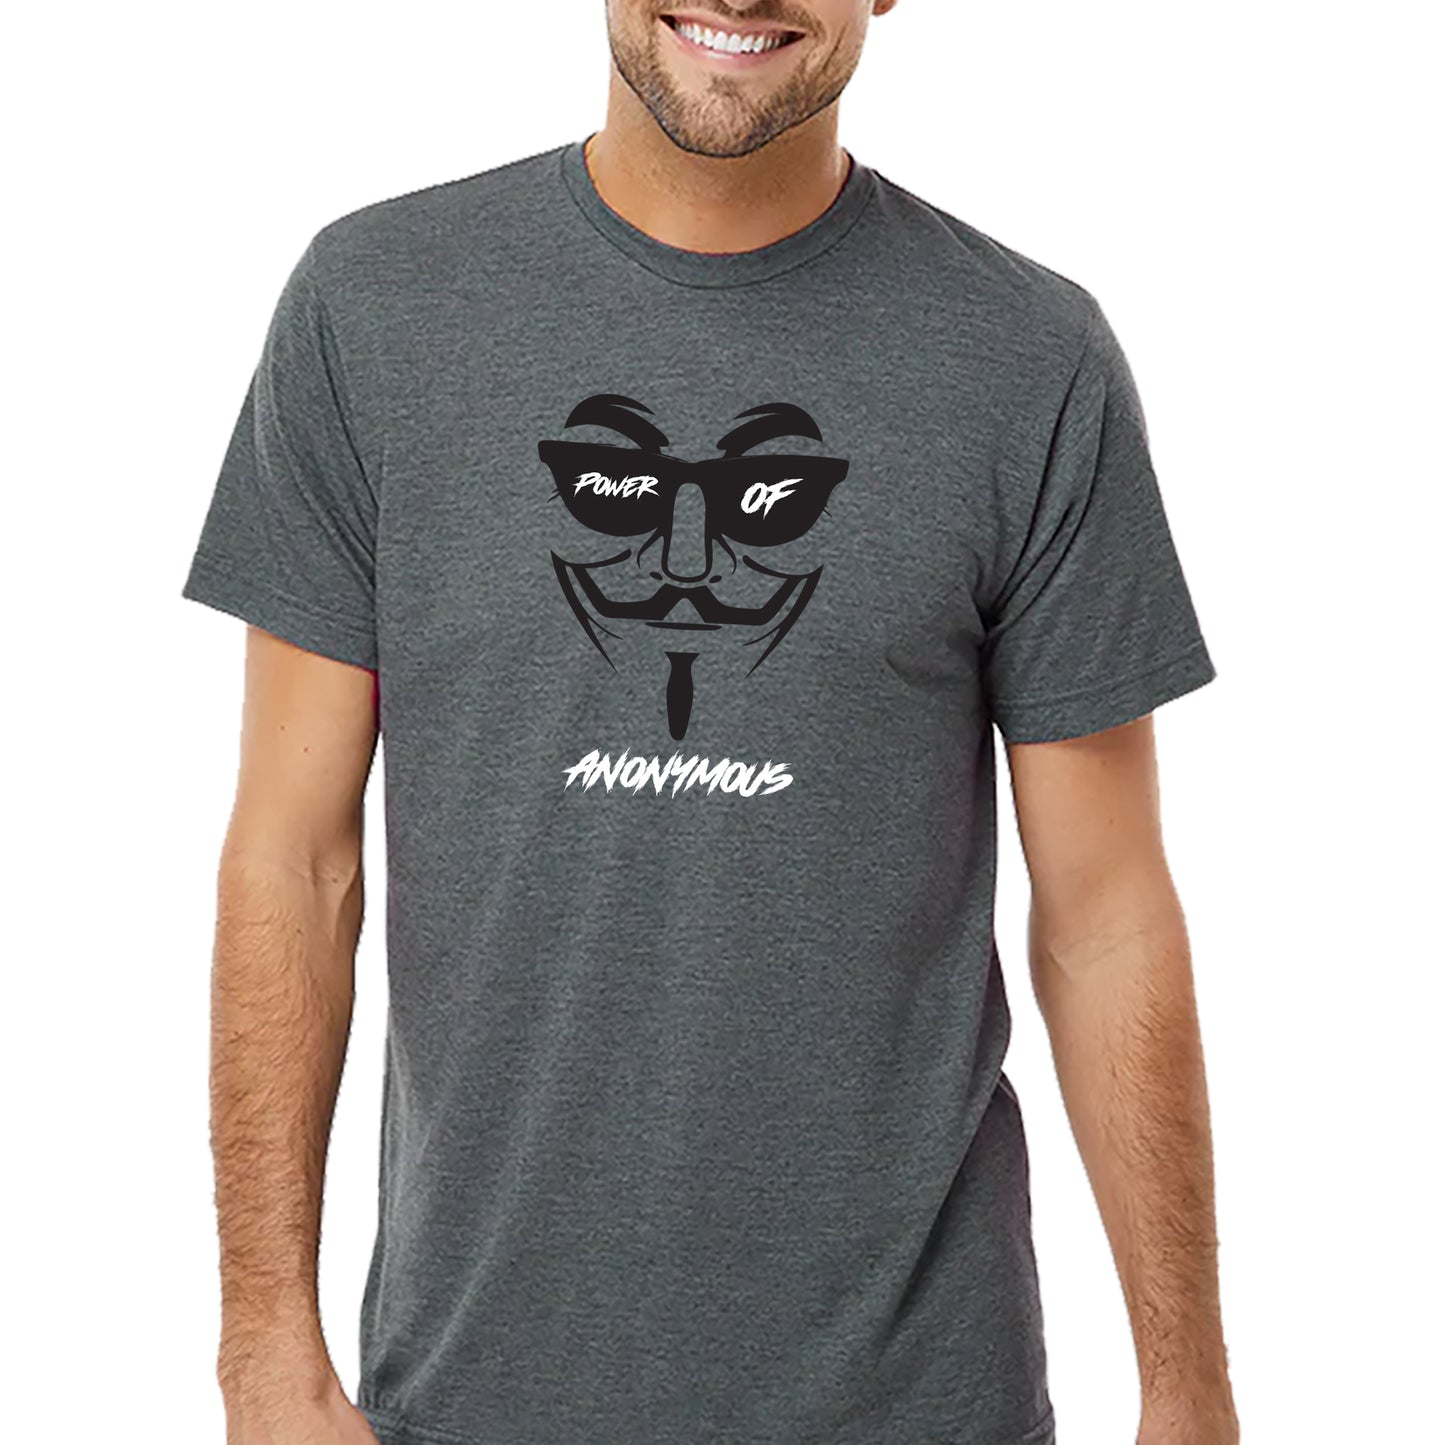 Anonymous T-shirt